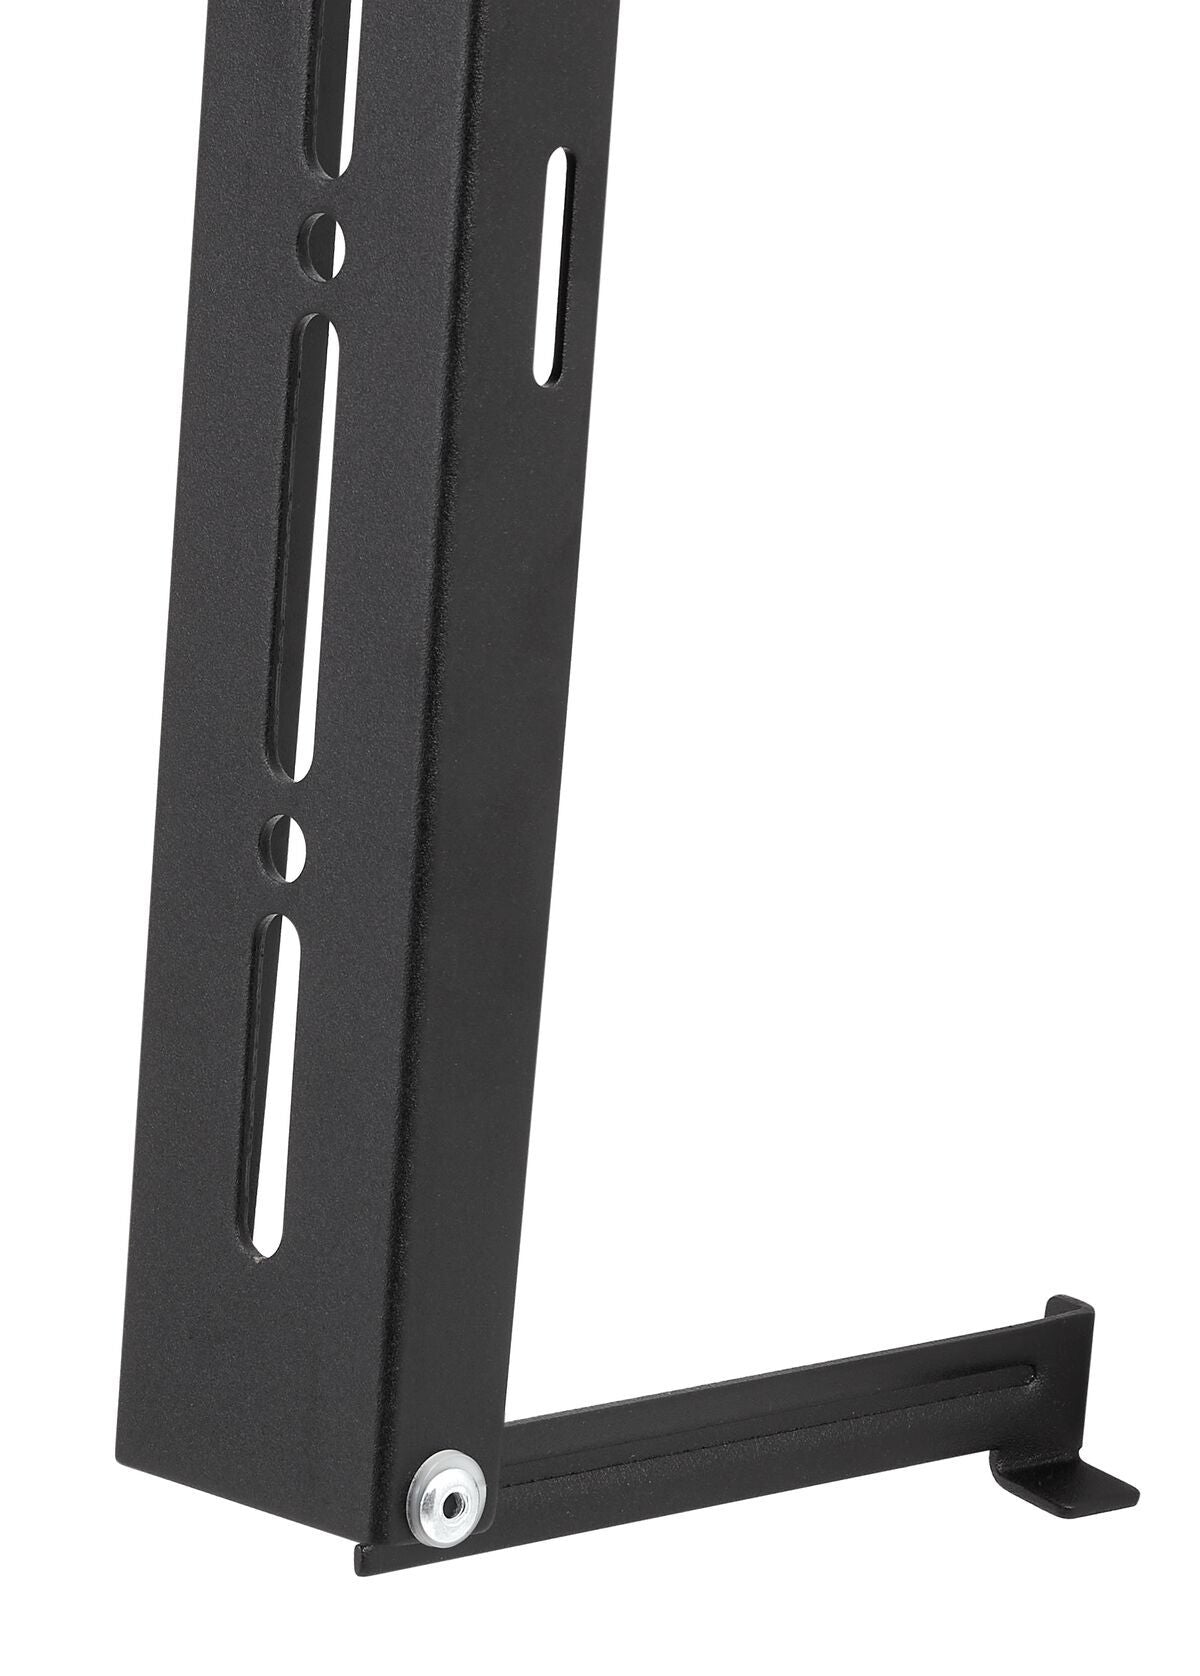 Vogel's - PFW 6900 Display Wall Mount Fixed